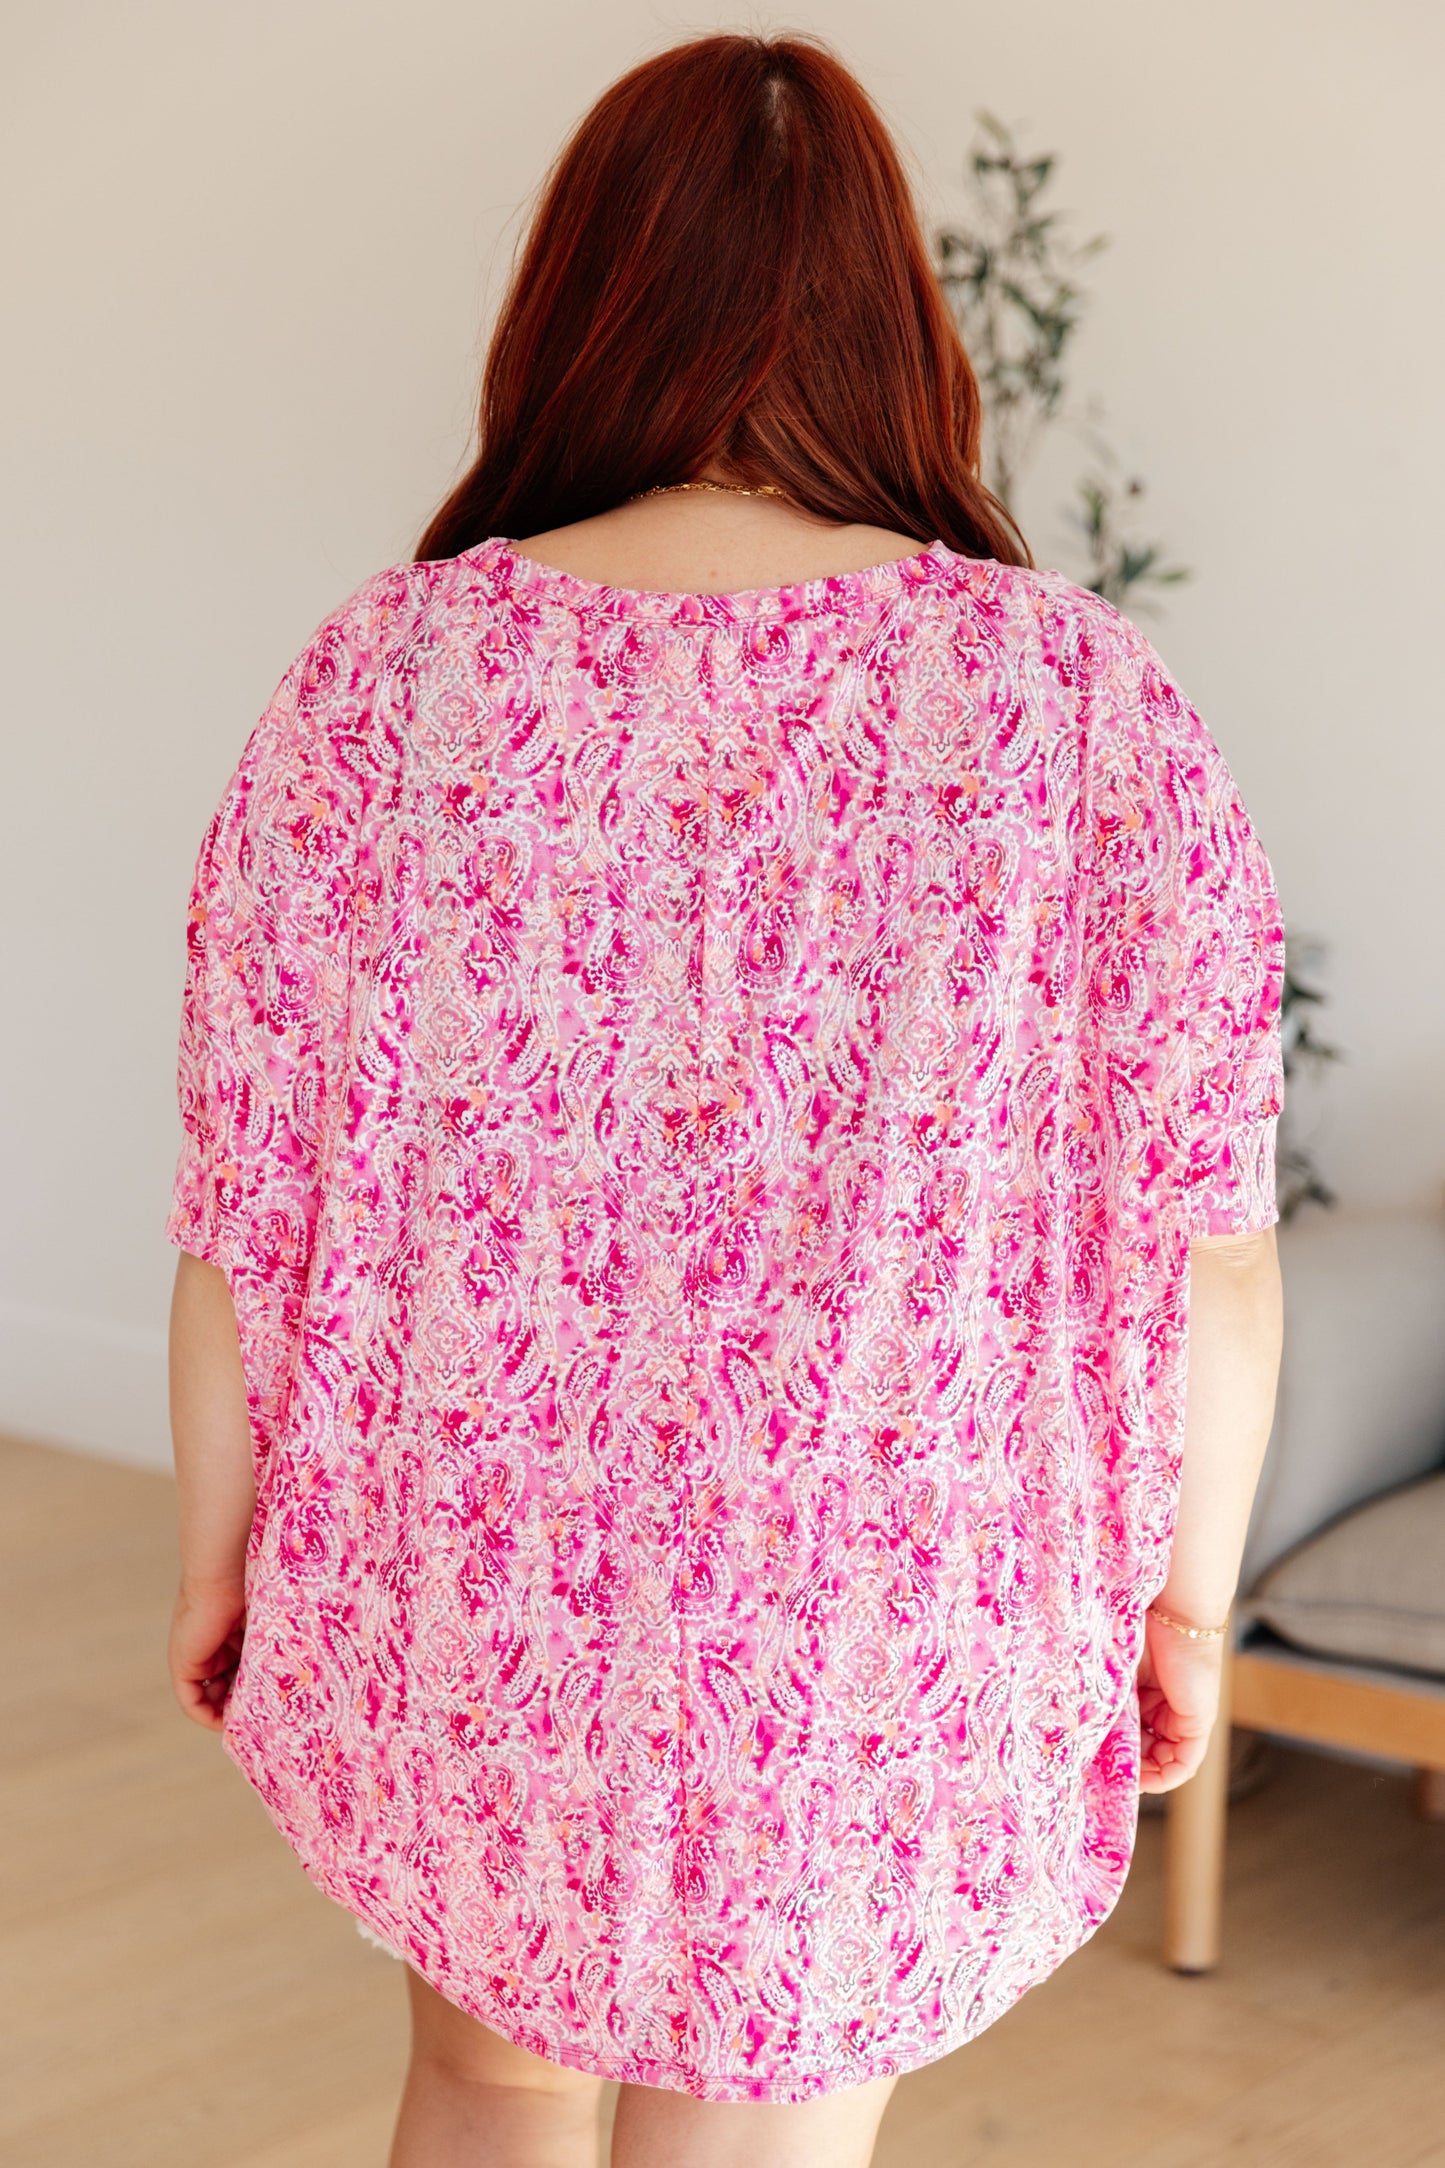 Blouse in Fuchsia and White Paisley